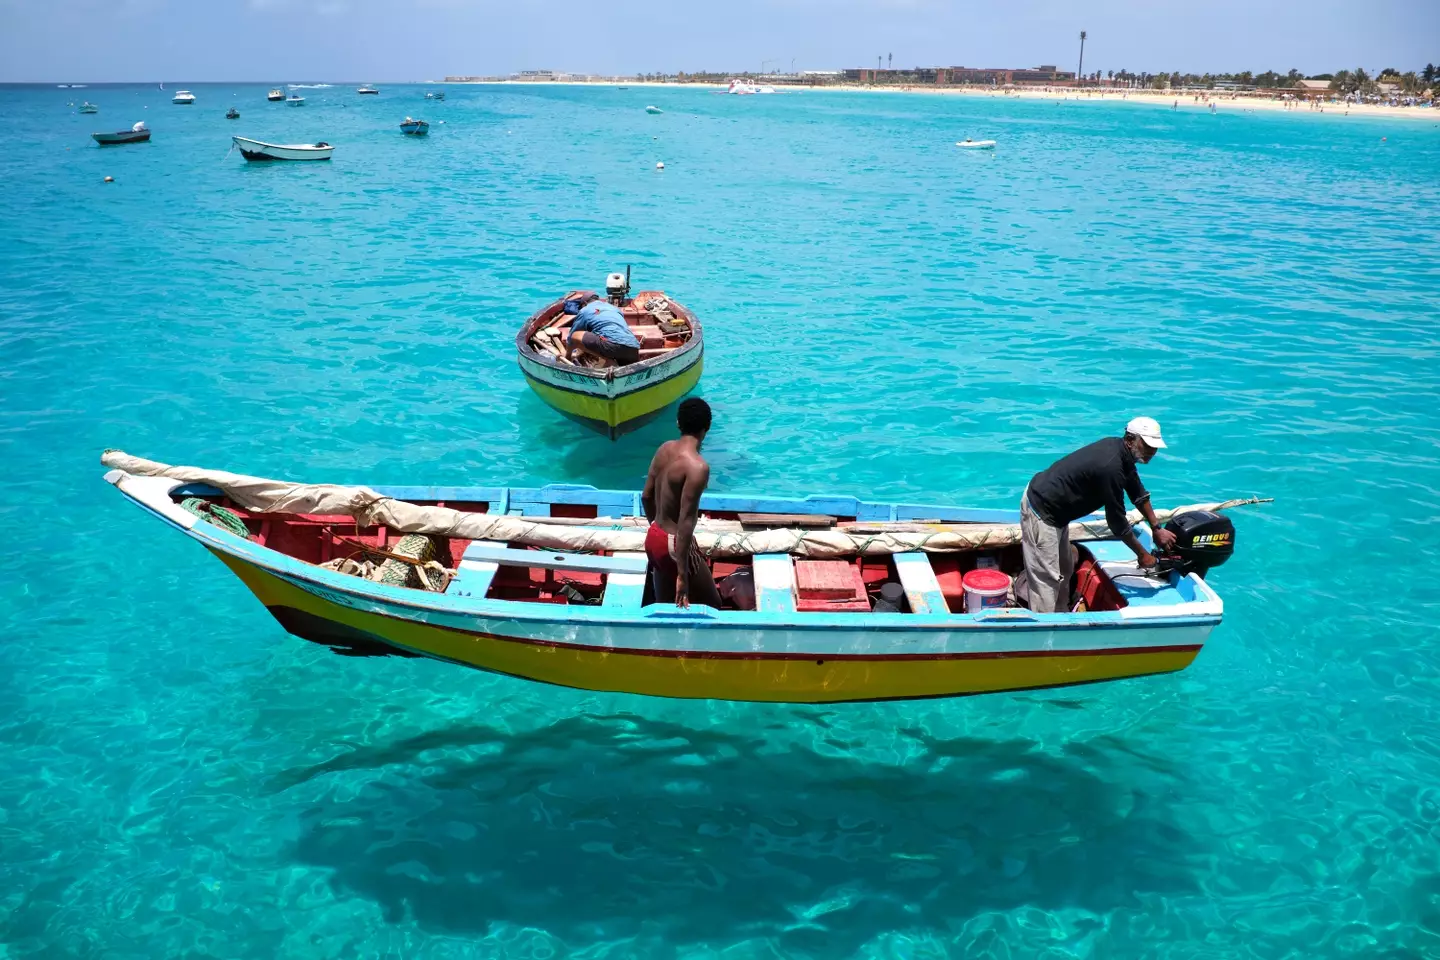 Cape Verde sits approximately 500km off West Africa’s coast.